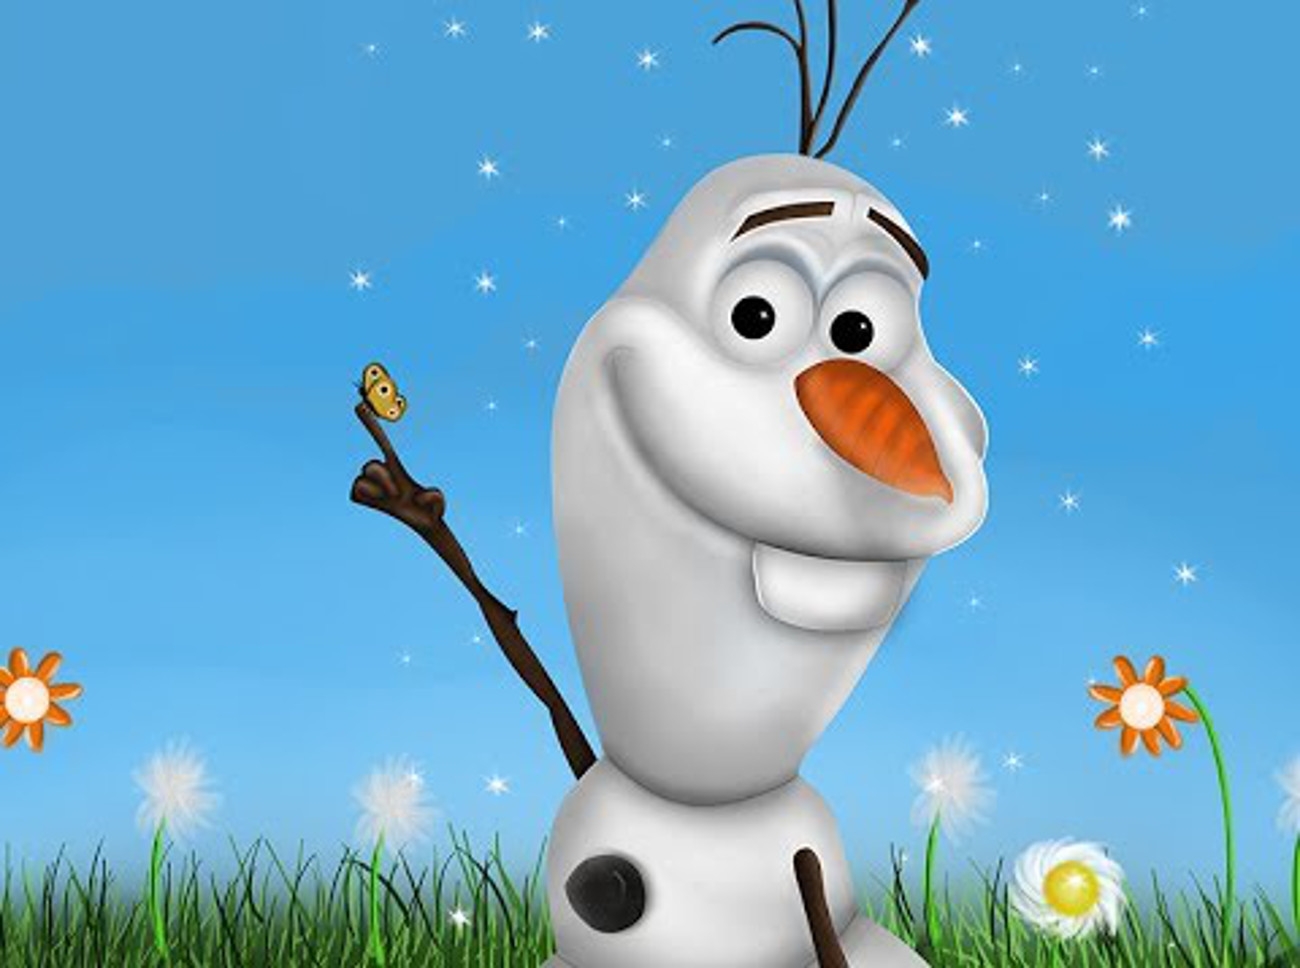 Olaf In Summer Has Been Always Dreaming Of But He Did Not